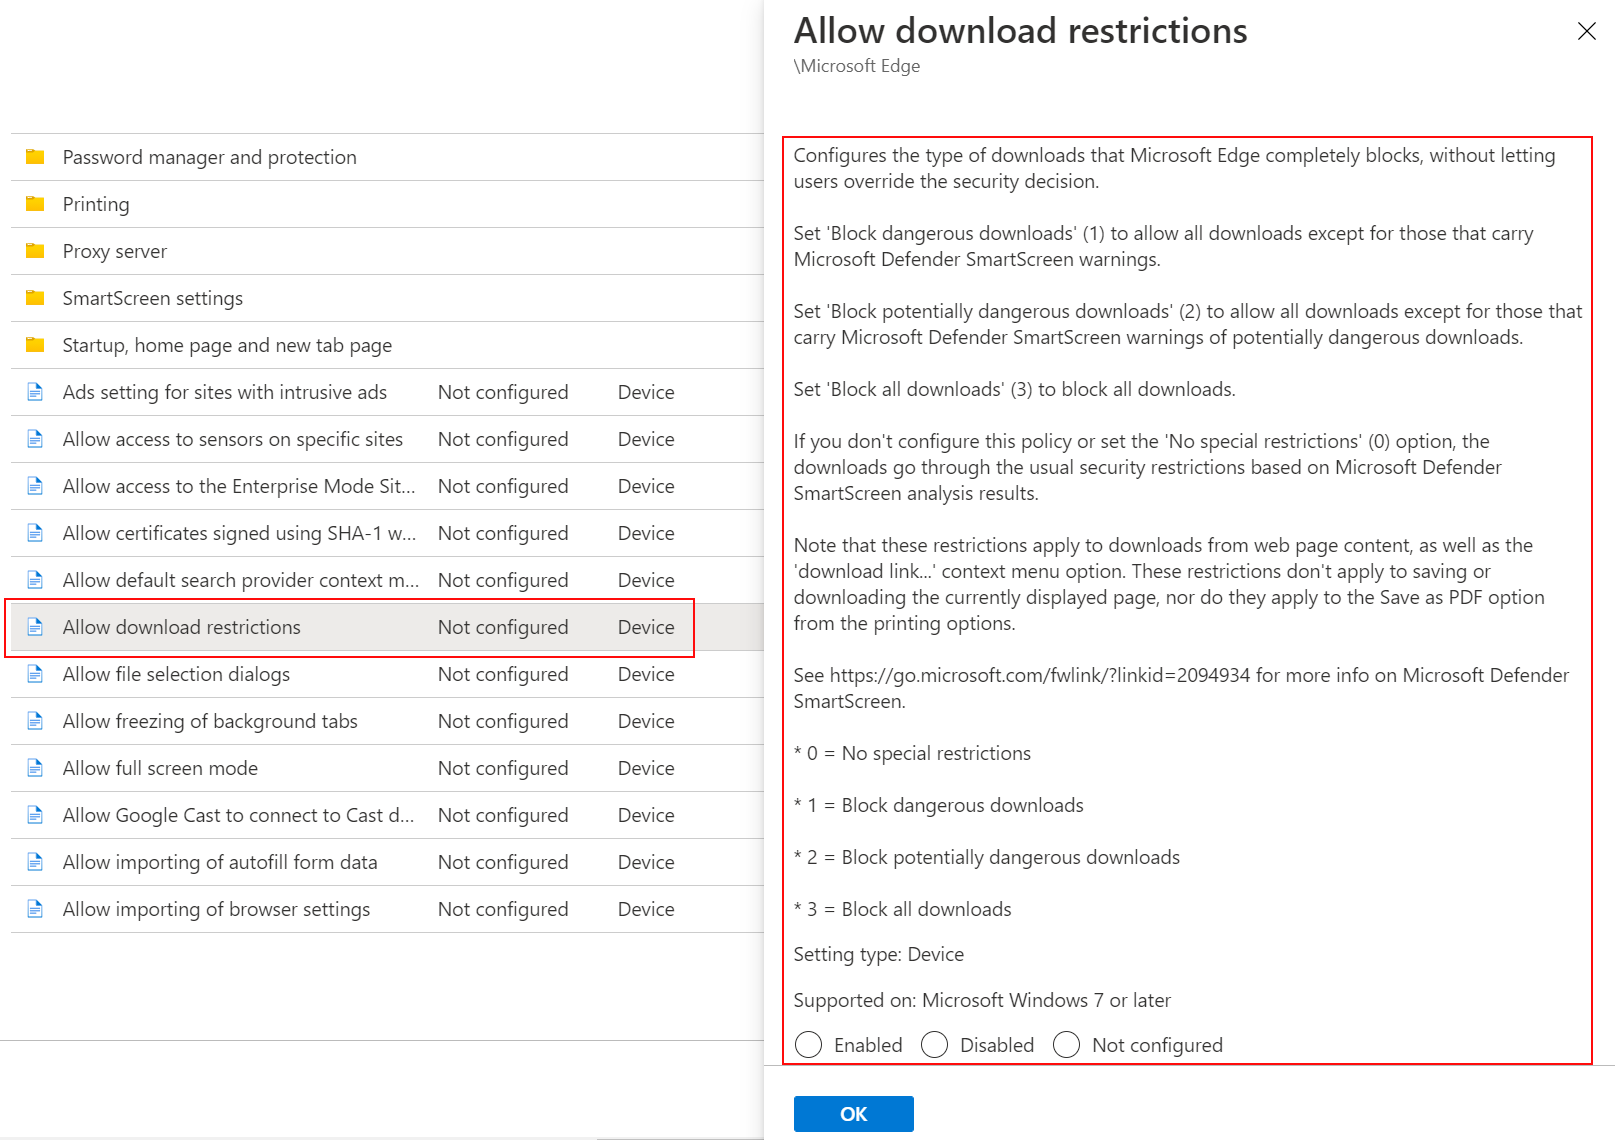 Screenshot of Select Microsoft Edge ADMX template and select a sample setting in Microsoft Intune and Intune admin center.